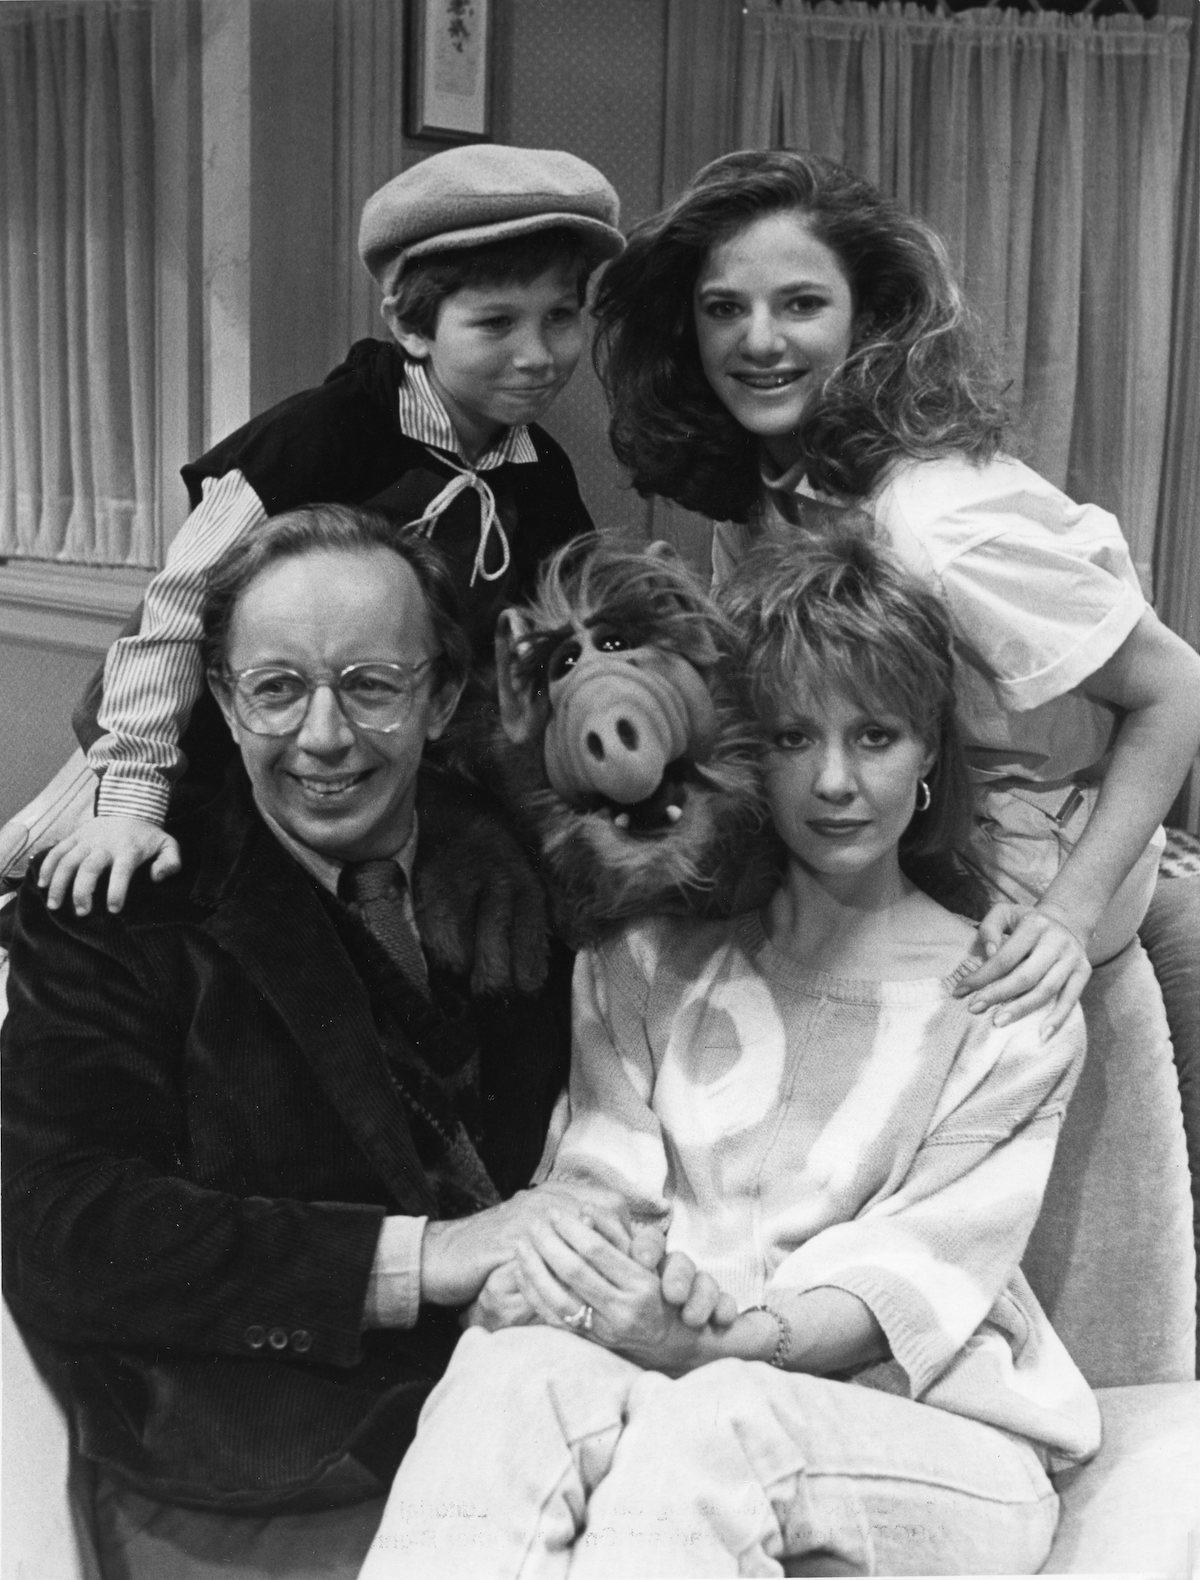 Portrait of the cast of ALF